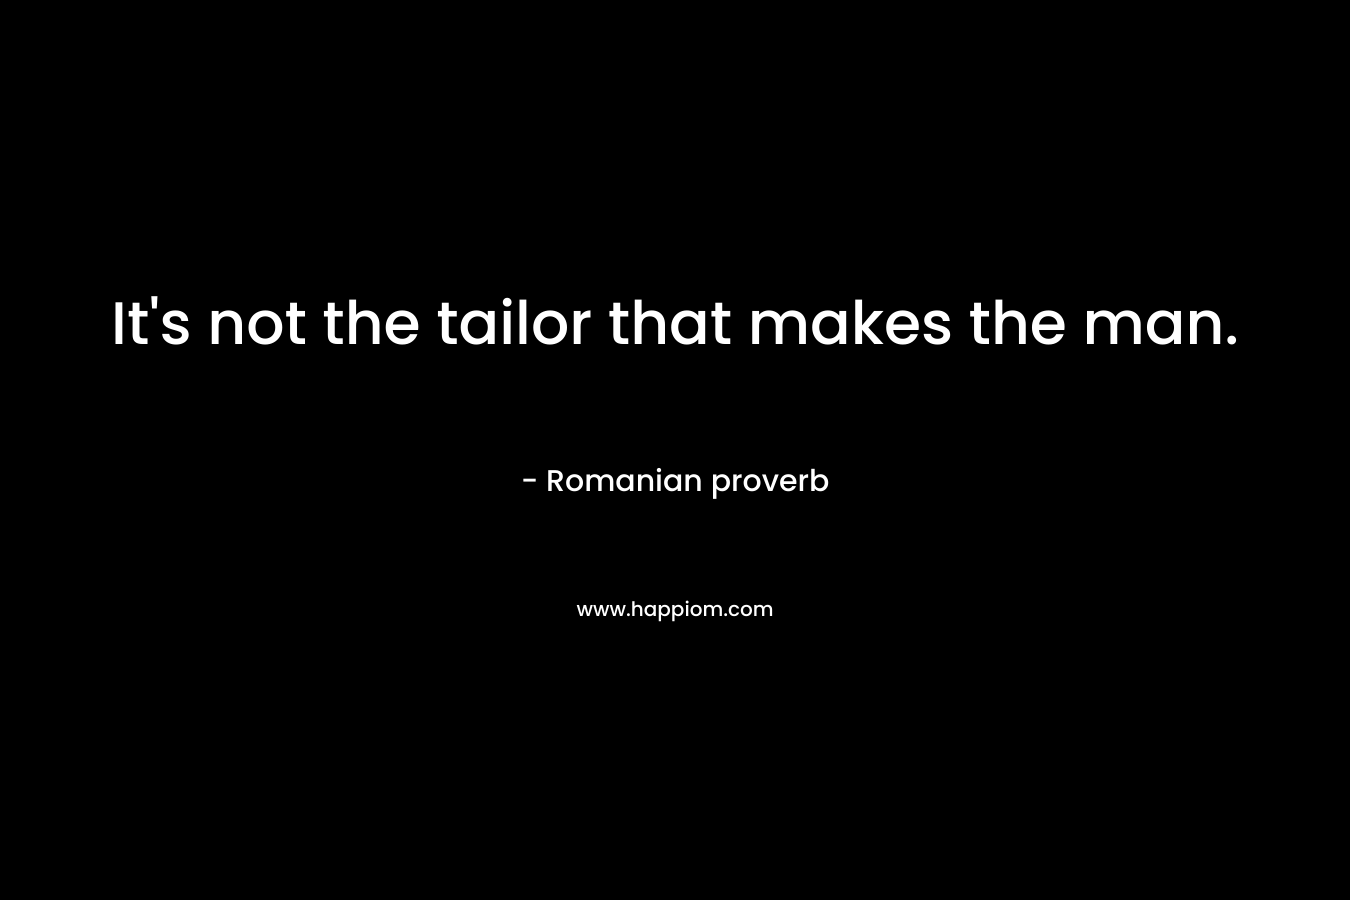 It’s not the tailor that makes the man. – Romanian proverb